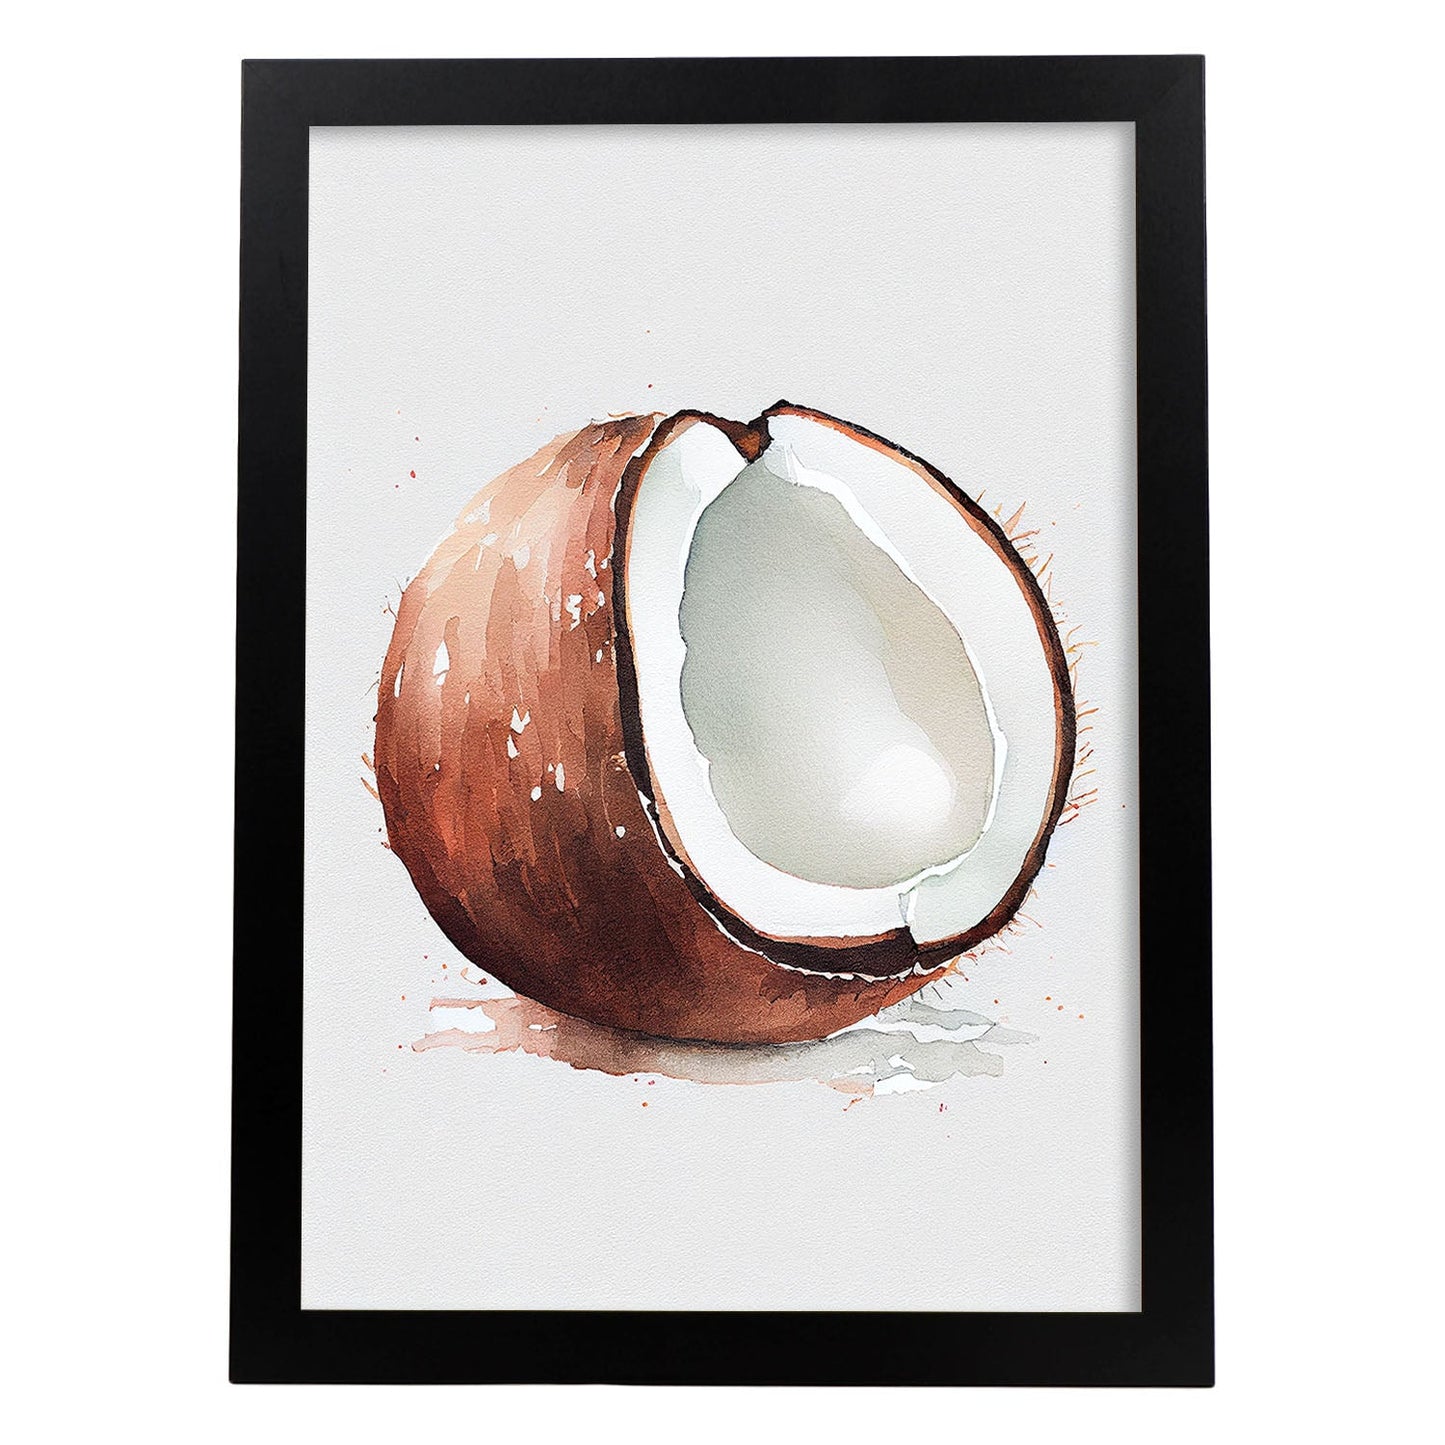 Nacnic minimalist Coconut_3. Aesthetic Wall Art Prints for Bedroom or Living Room Design.